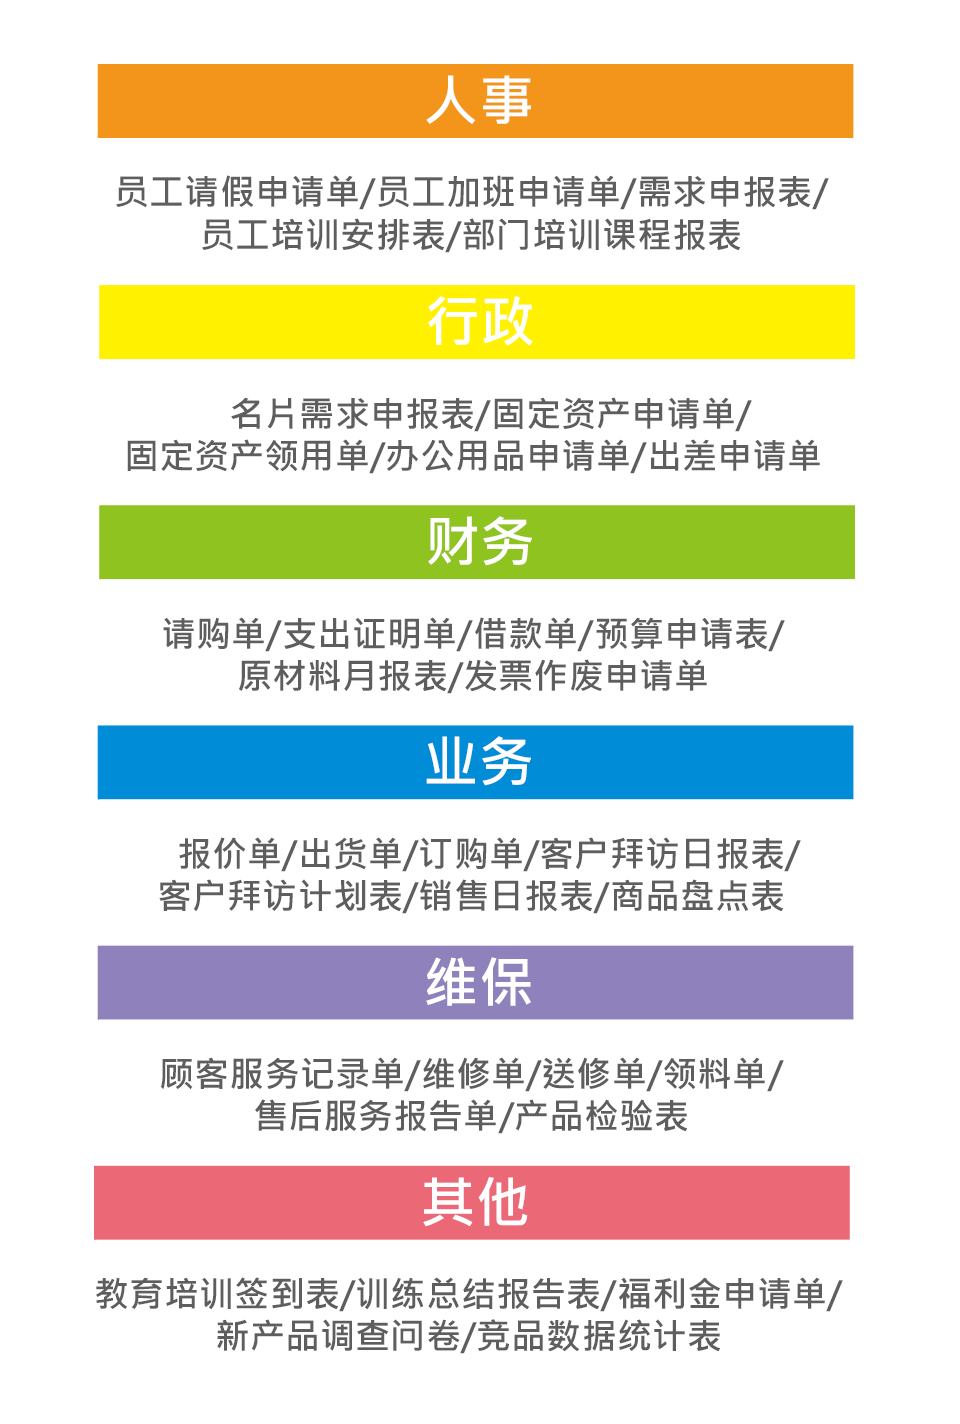 03.workflow-forms-app-cn.png